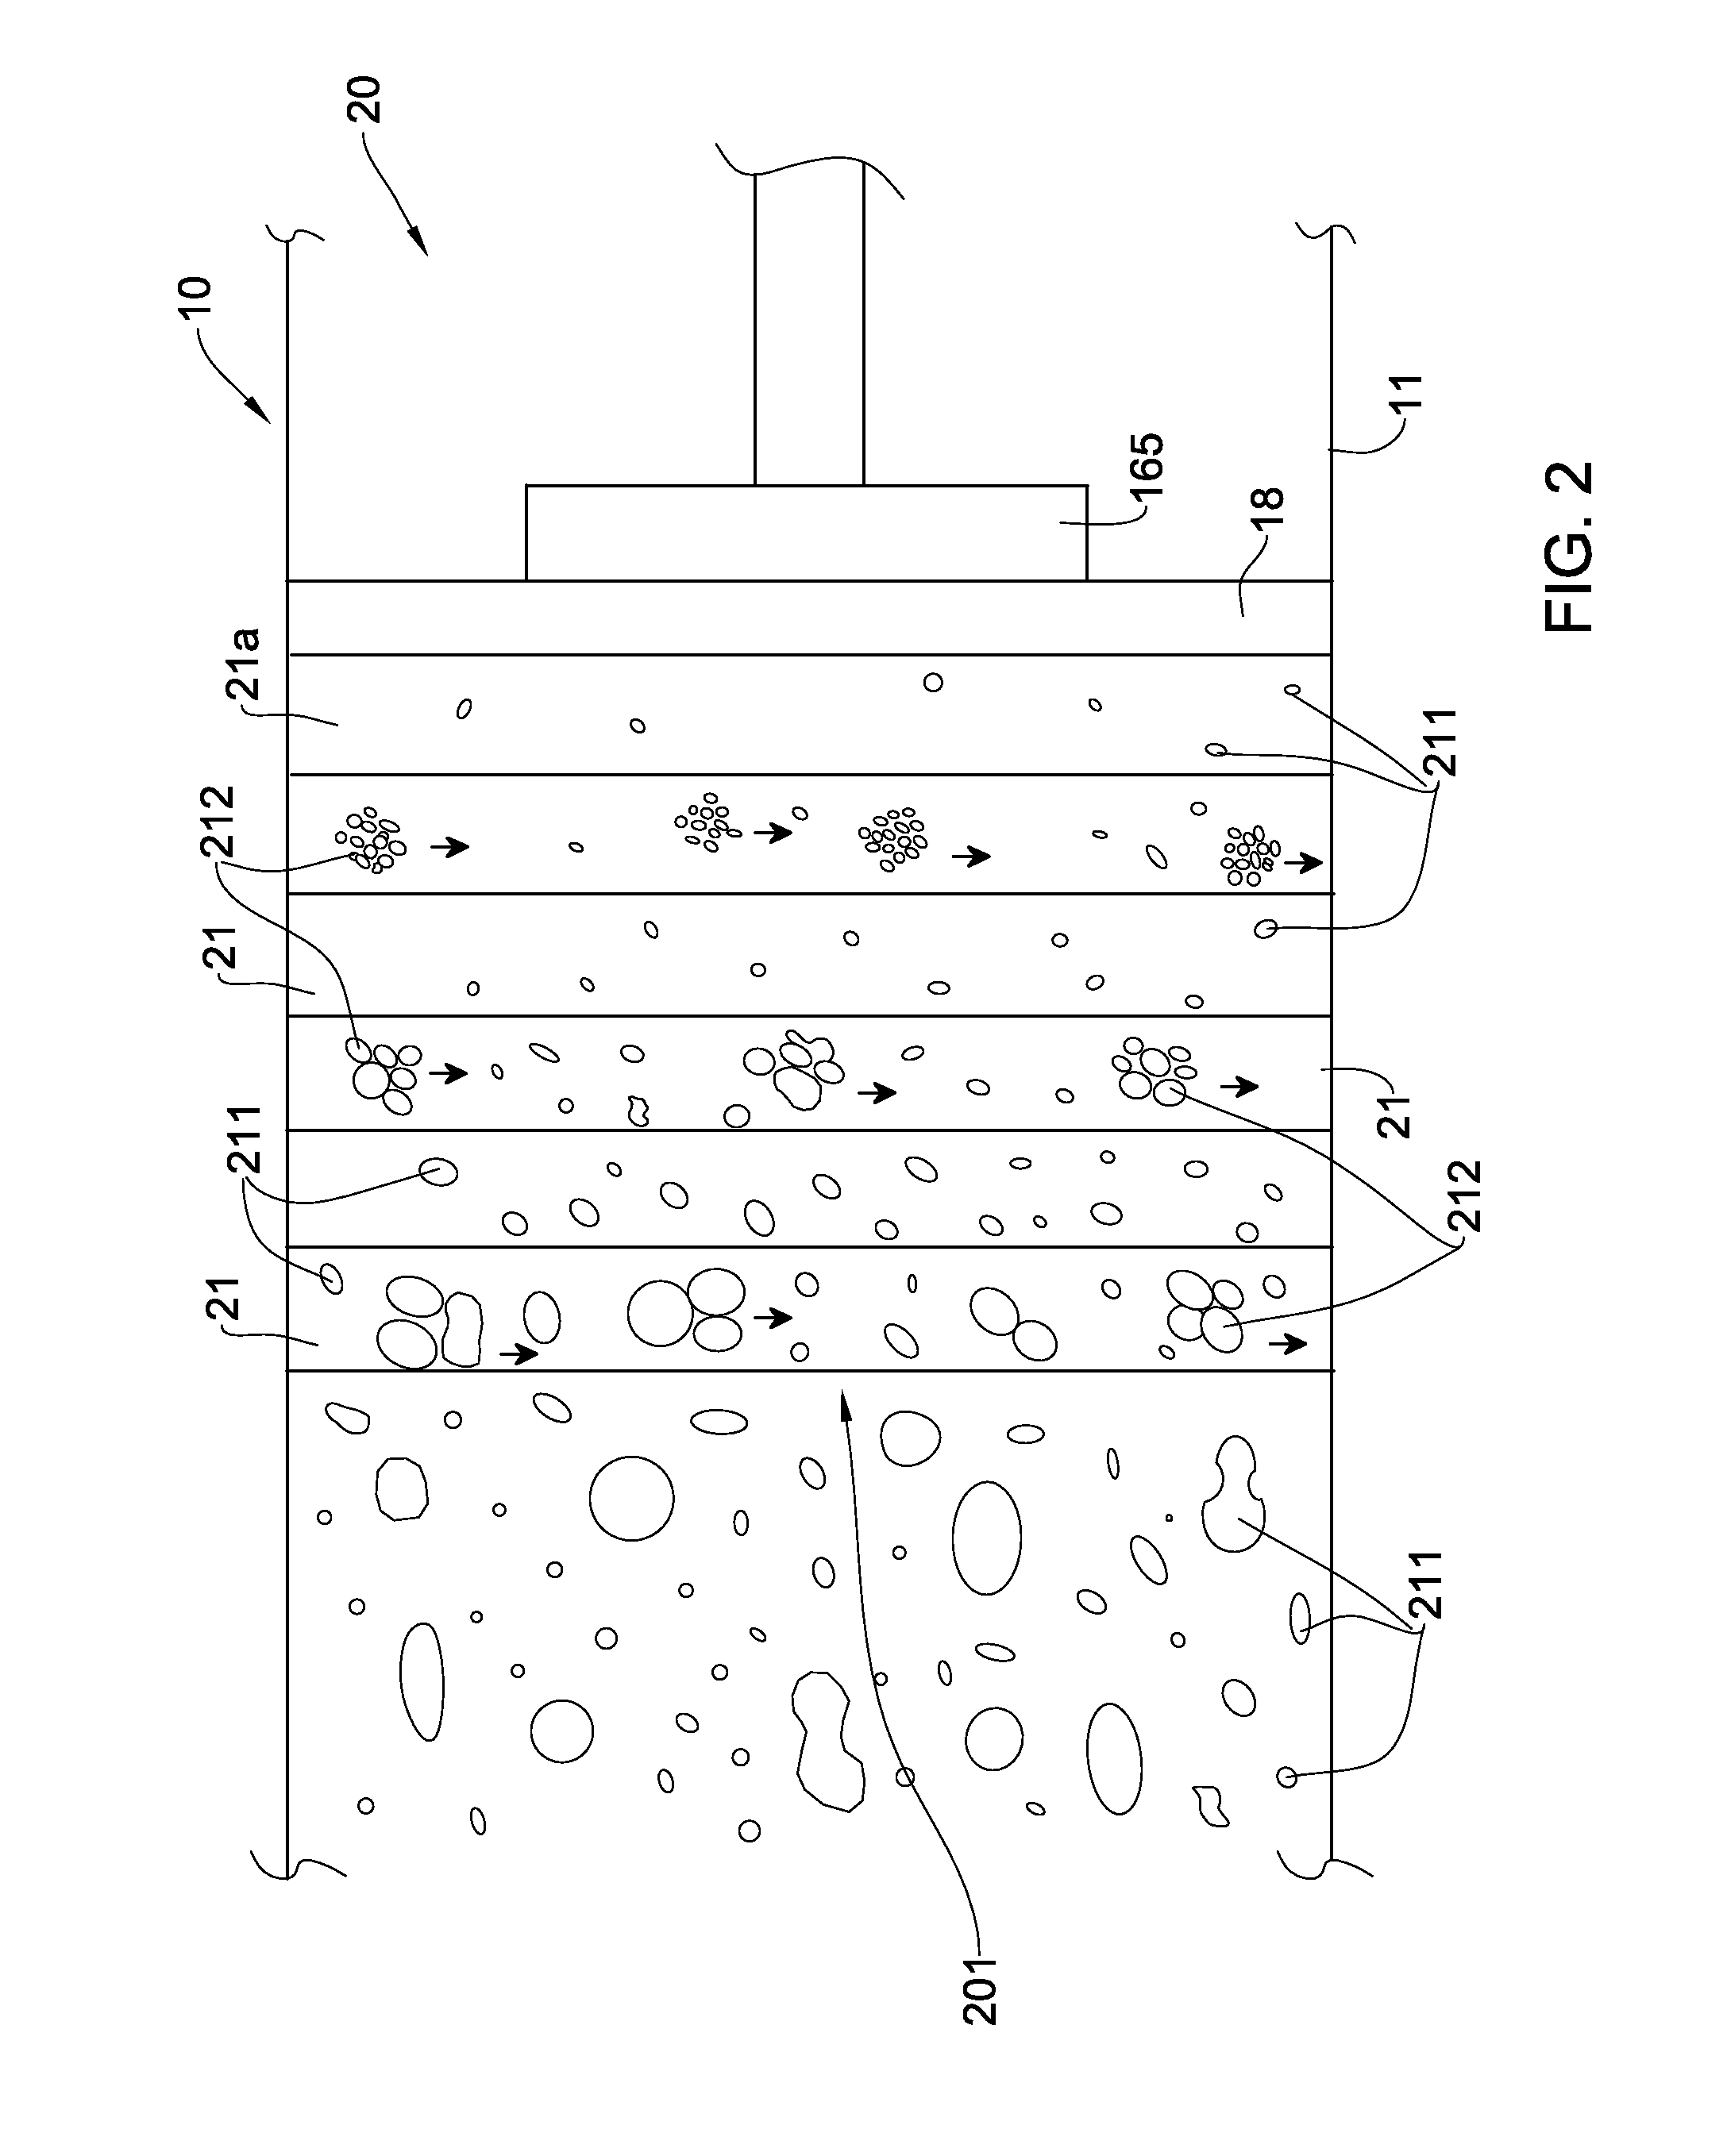 Apparatus and Method for Treatment of a Contaminated Water-Based Fluid